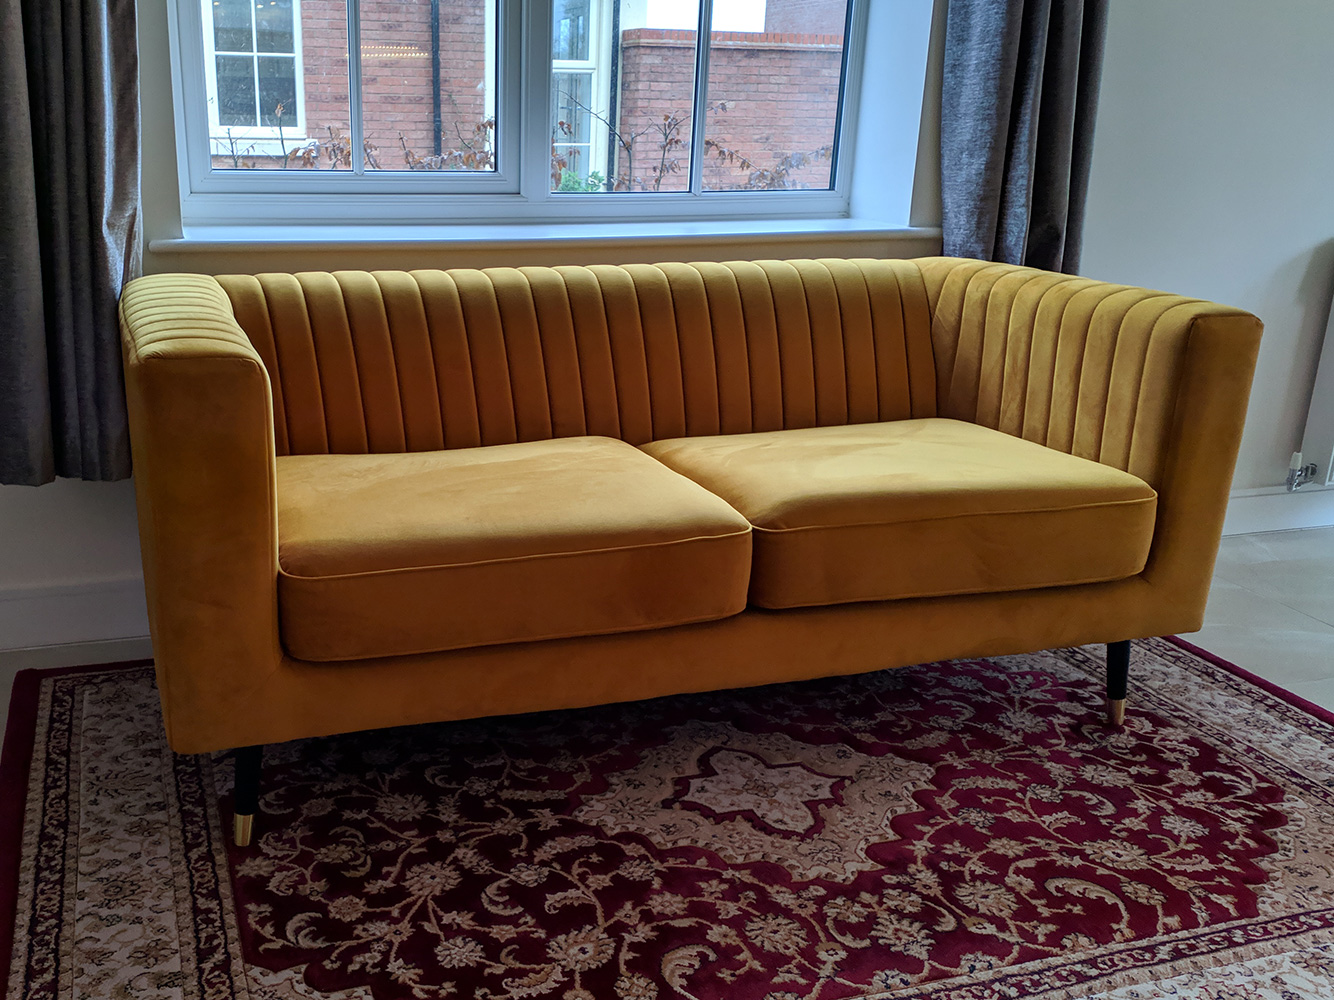 Slender two-seater sofa in mustard color